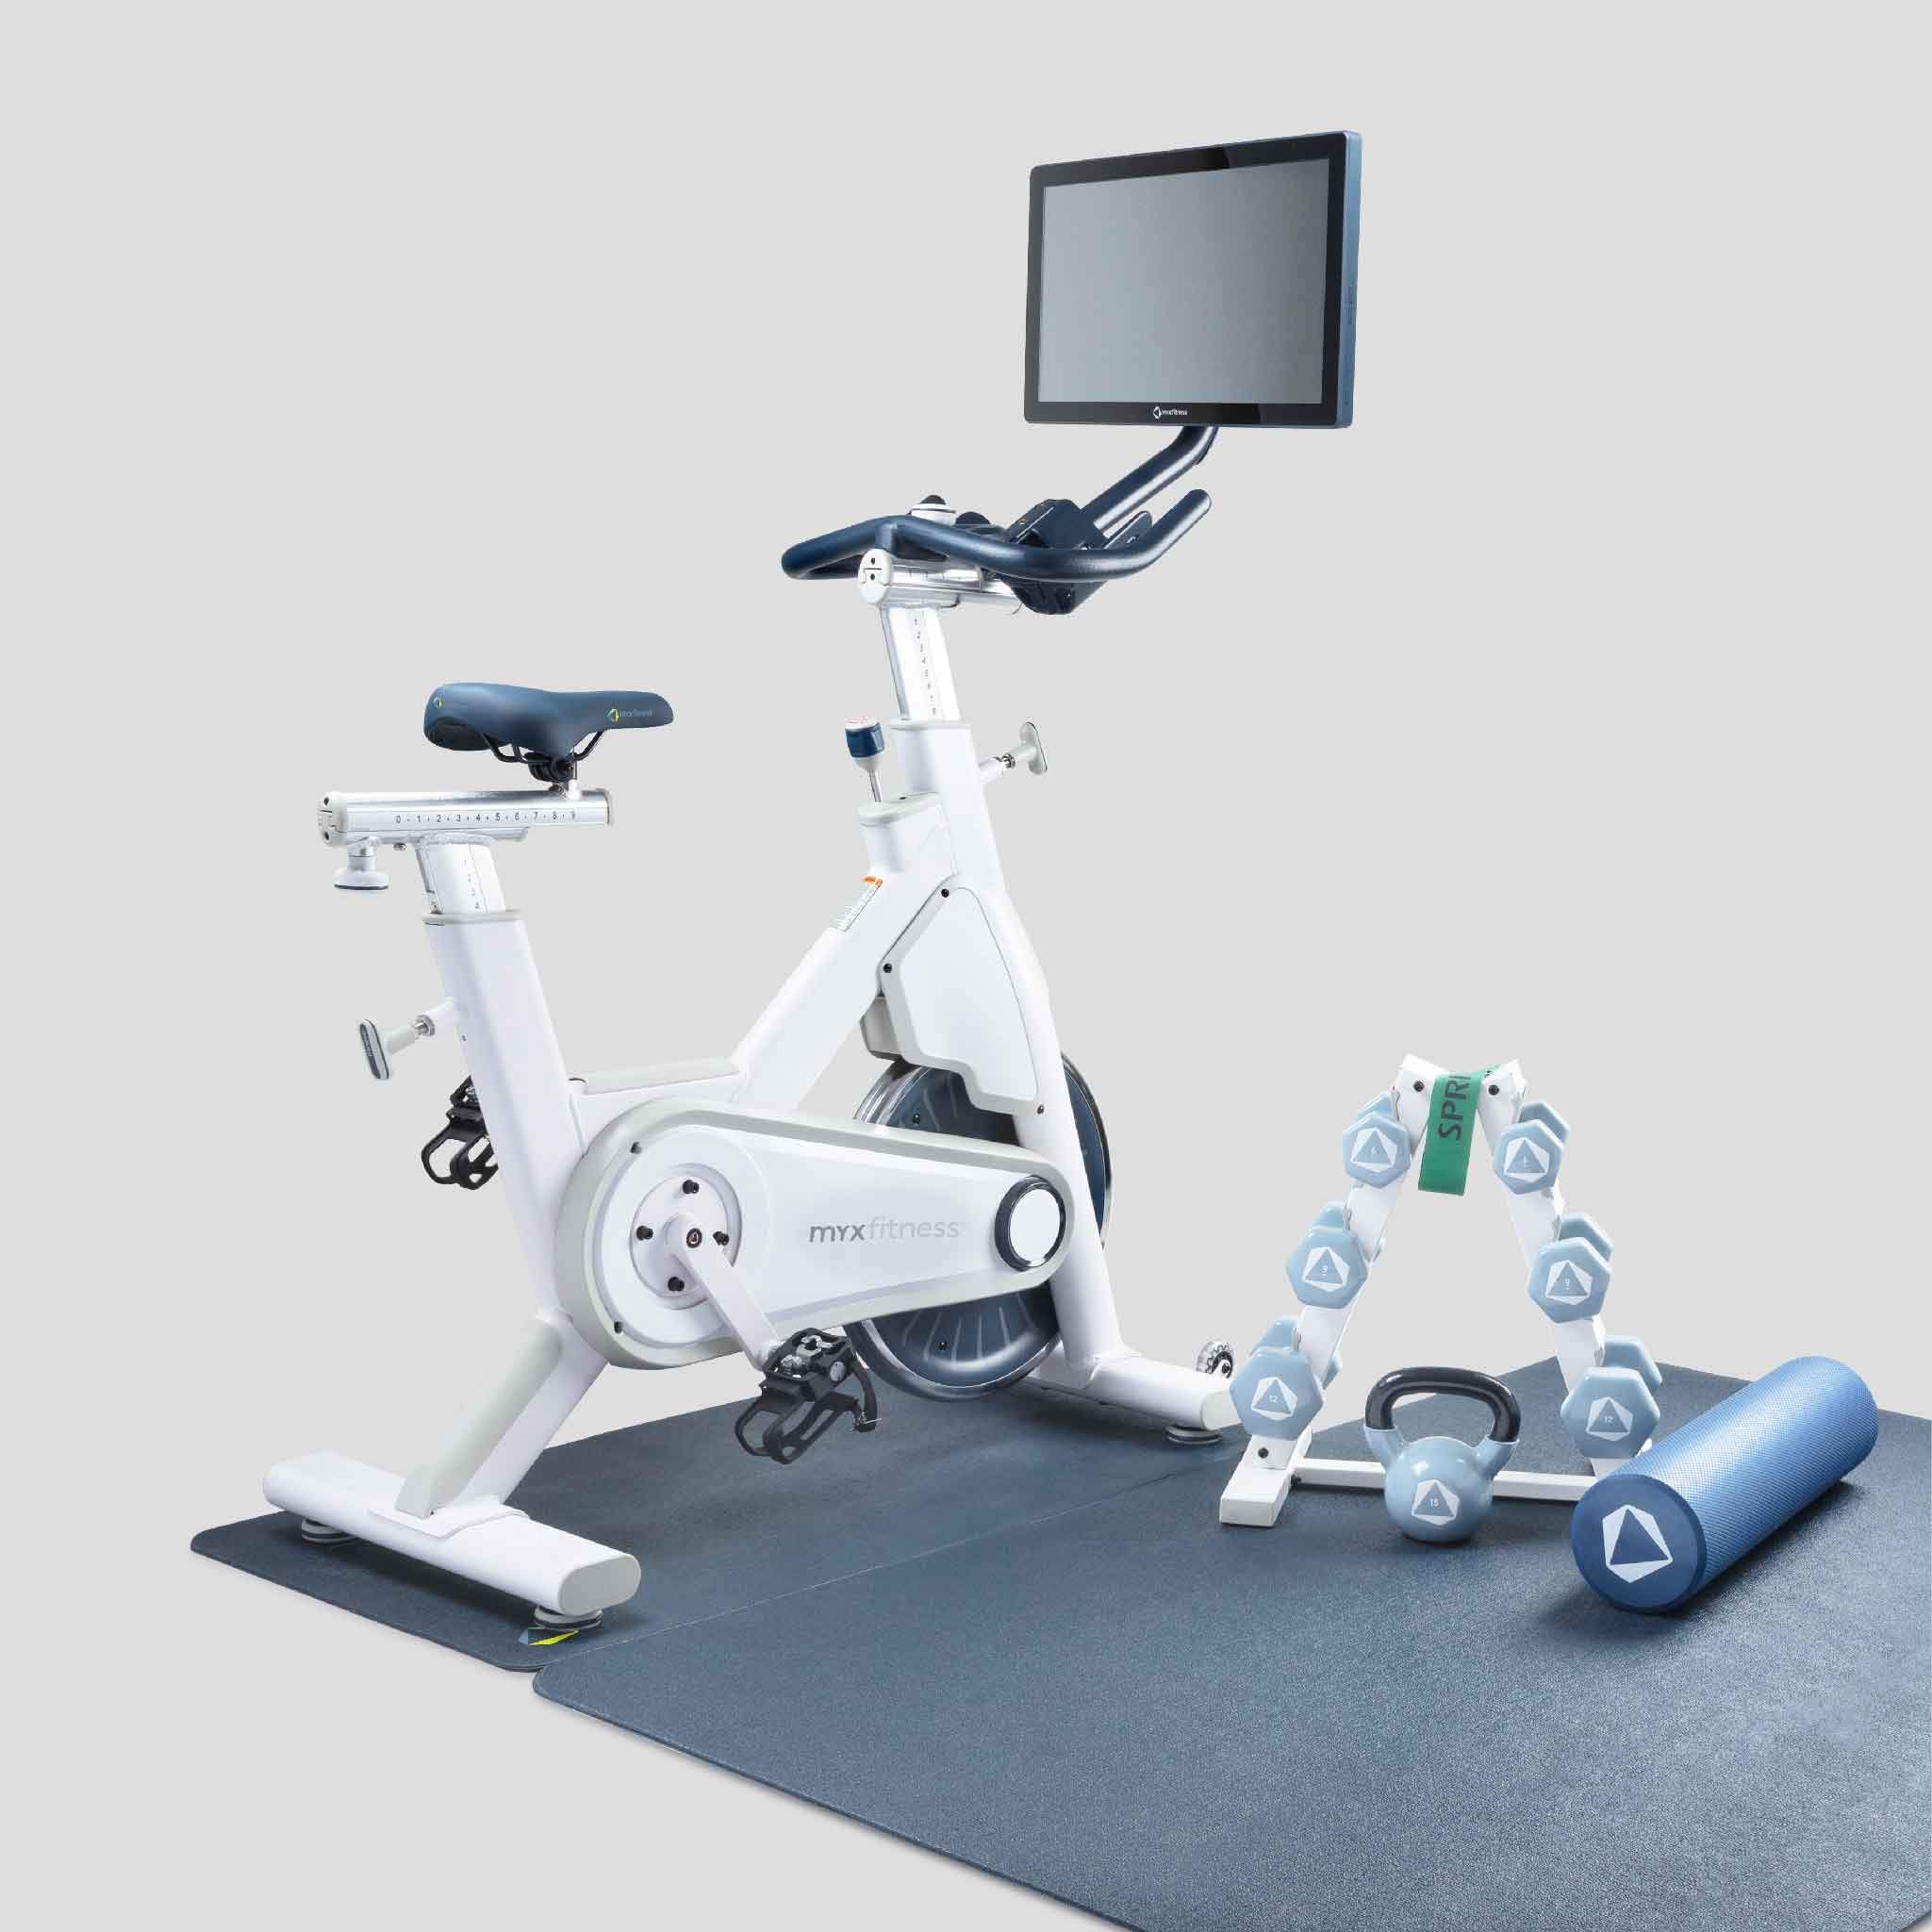 5 Day Myx fitness spin bike reviews with Comfort Workout Clothes